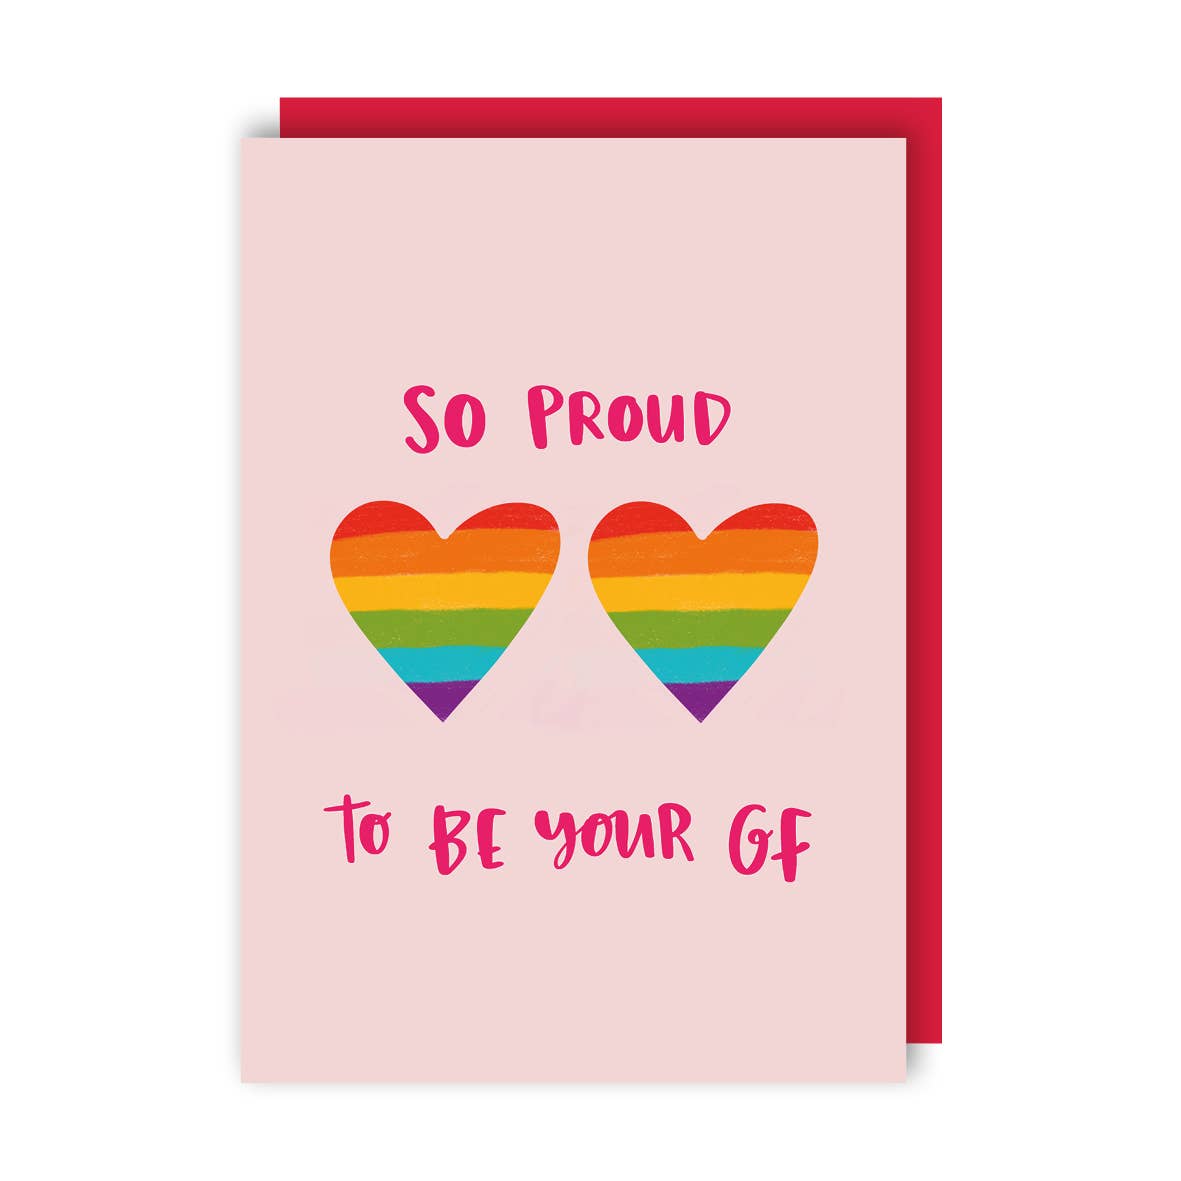 So Proud To Be Your GF - Greeting Card - Mellow Monkey